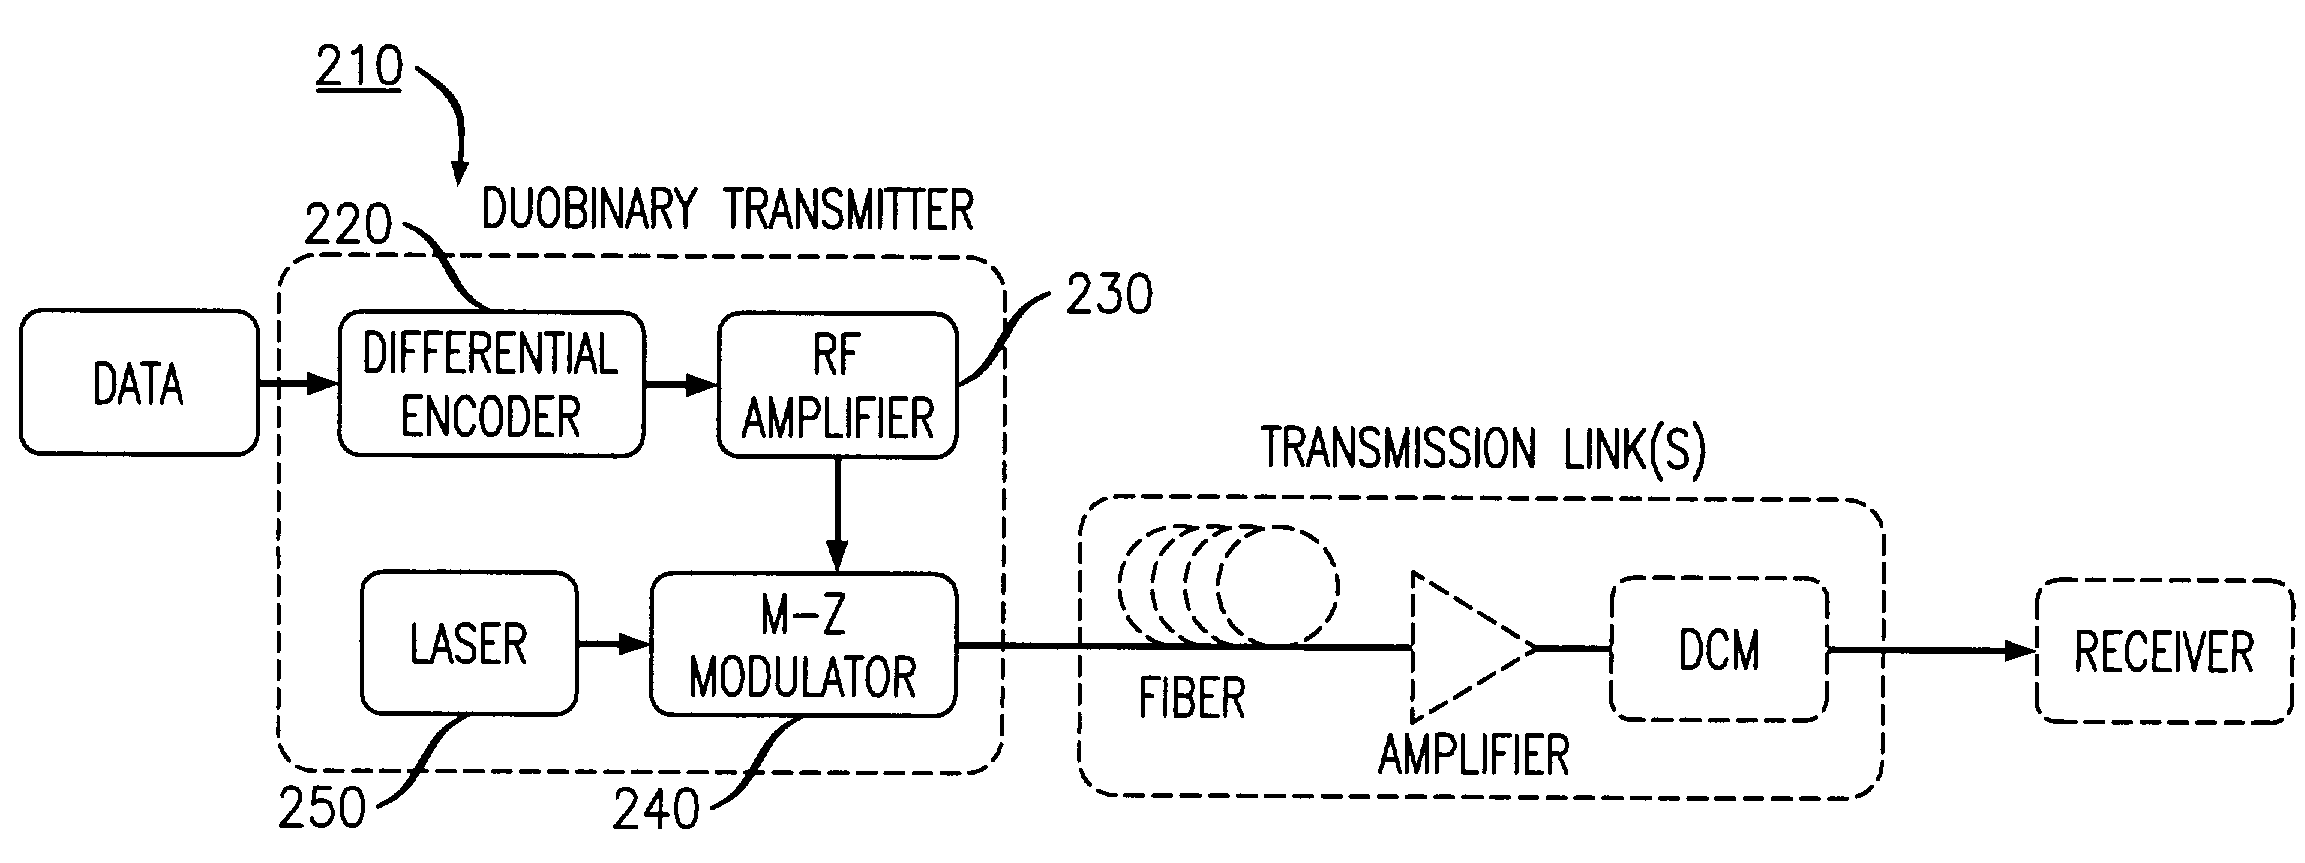 Apparatus and method for duobinary transmission